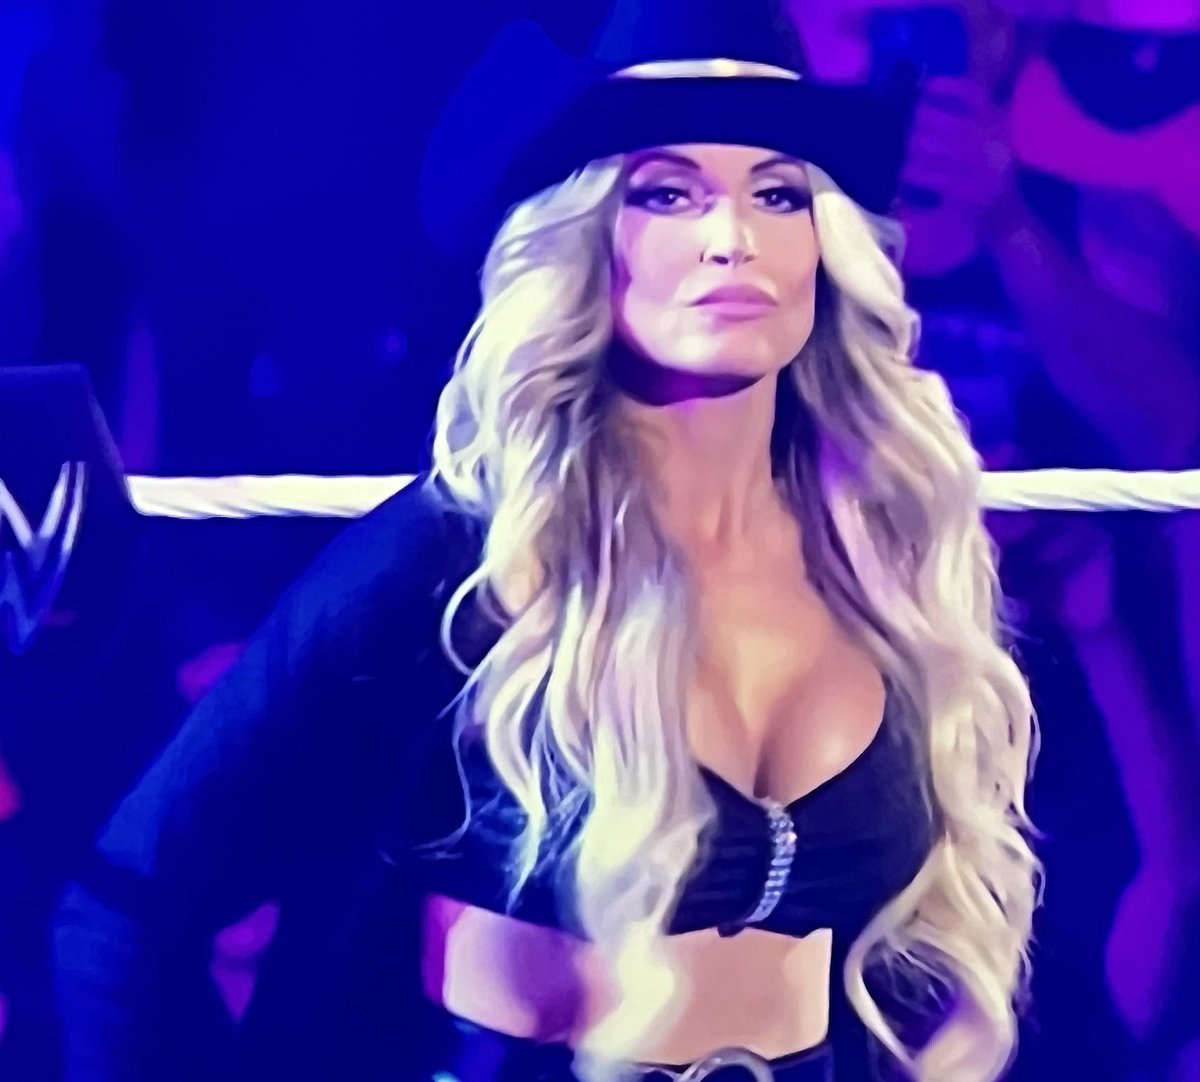 RT @TheCovalentTV: Trish Stratus gets better and better #WWERaw https://t.co/PFYtkToo6o